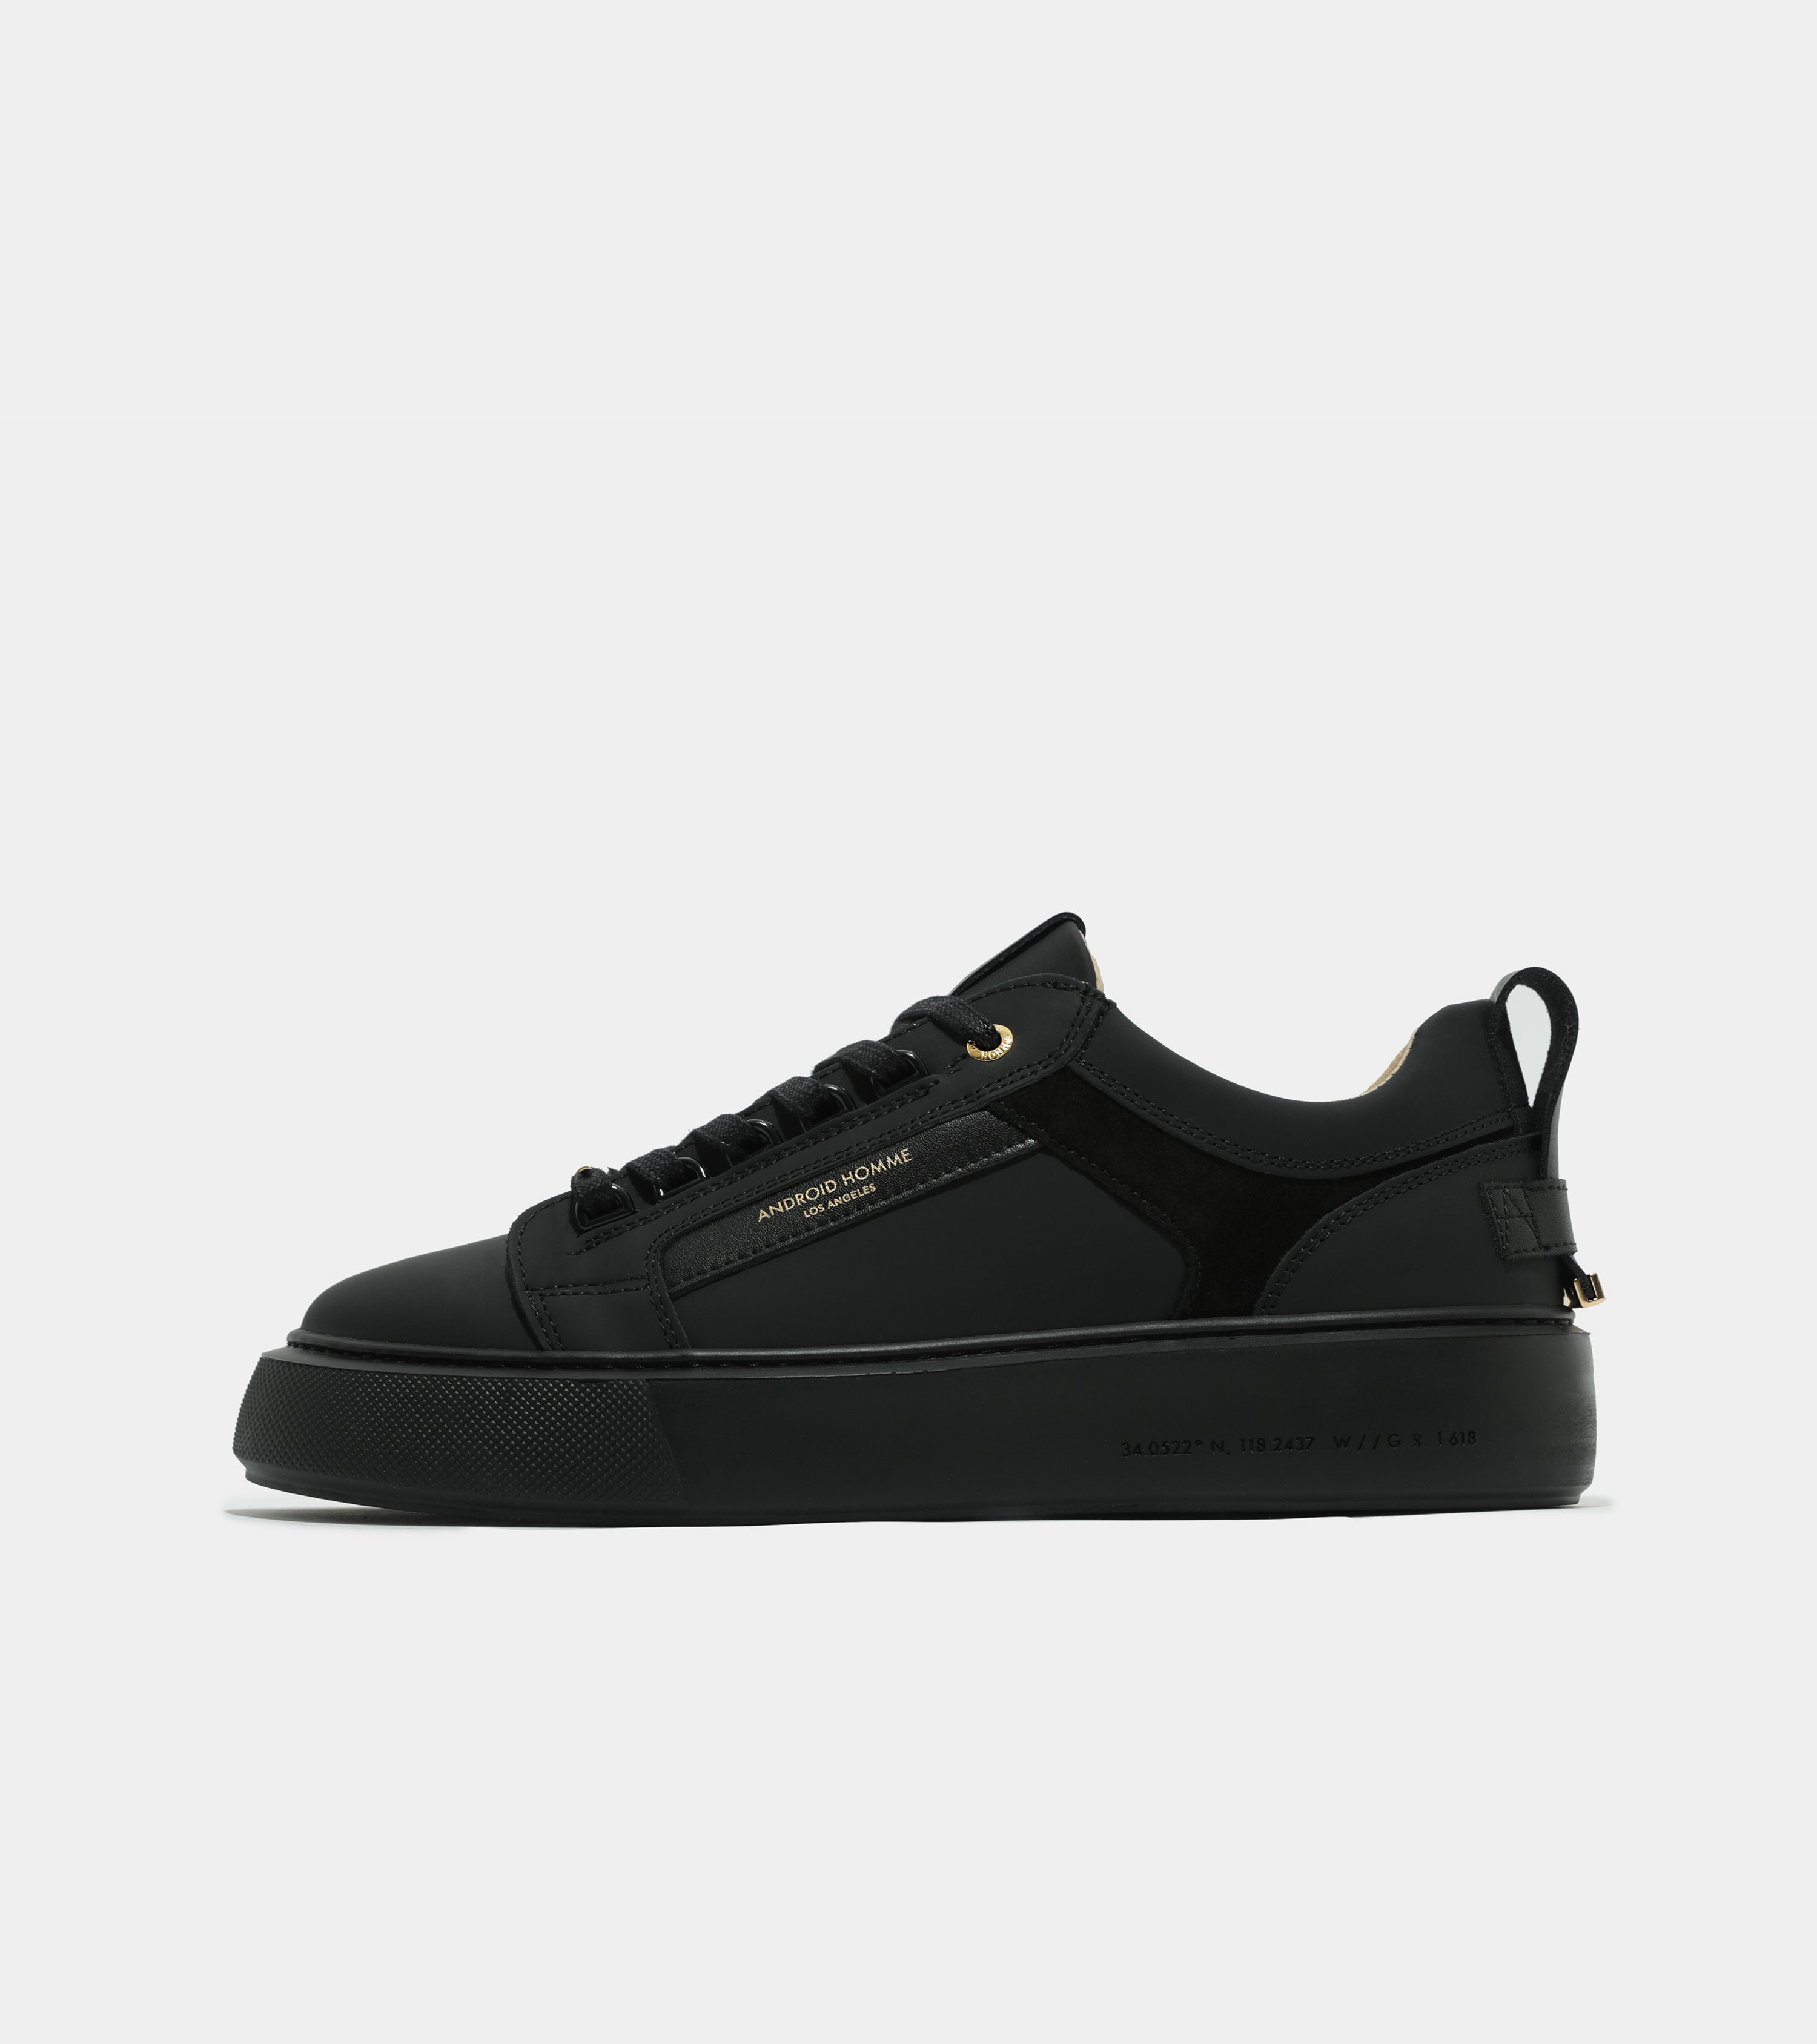 Venice Oversized | Black Gomma Leather Suede AHP233-30